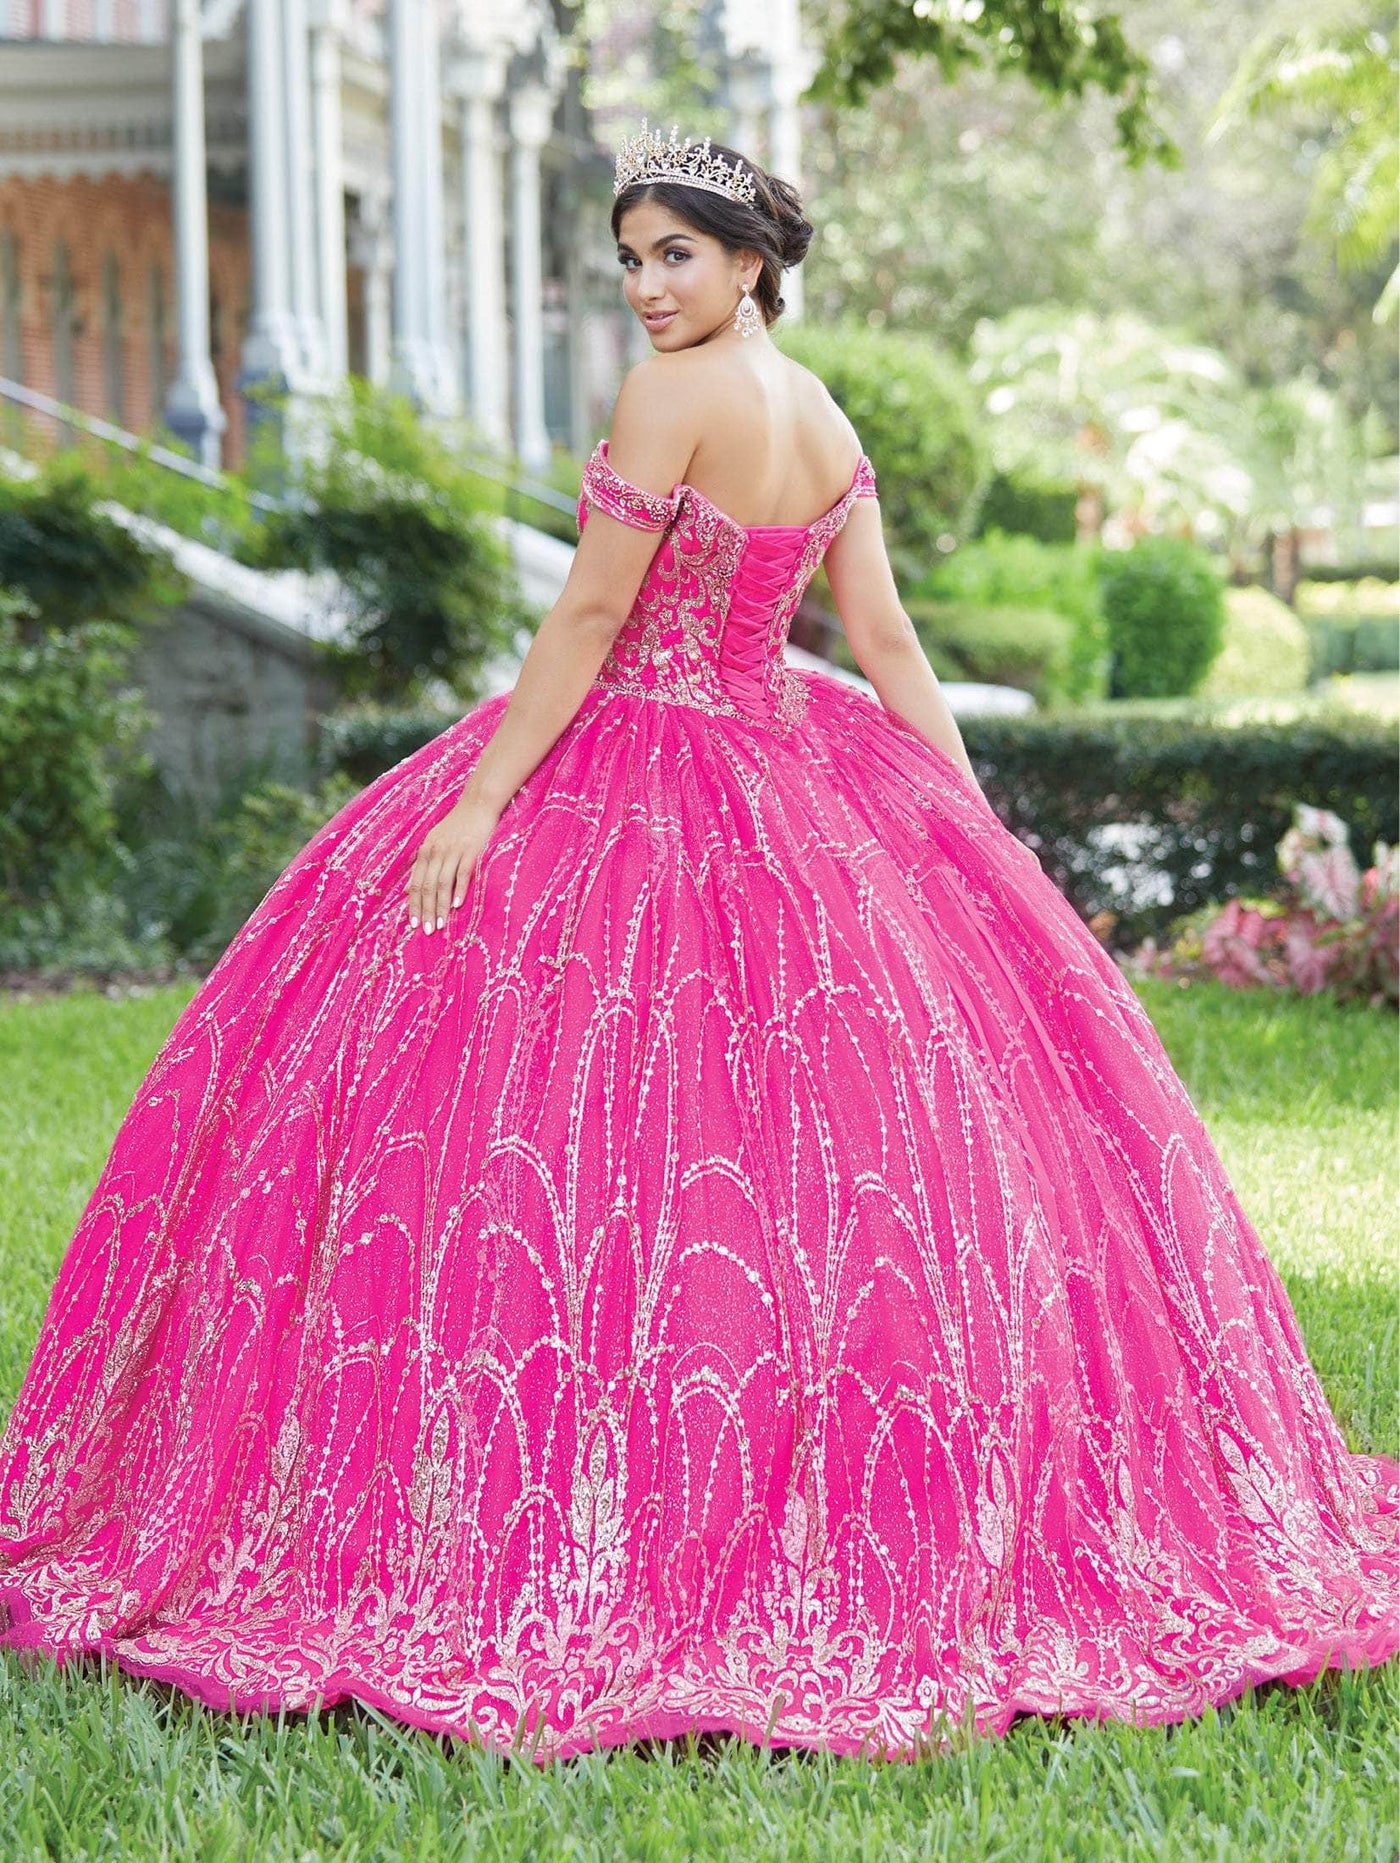 Fiesta Gowns 56463 - Arched Detail Glittered Ball Gown Special Occasion Dress